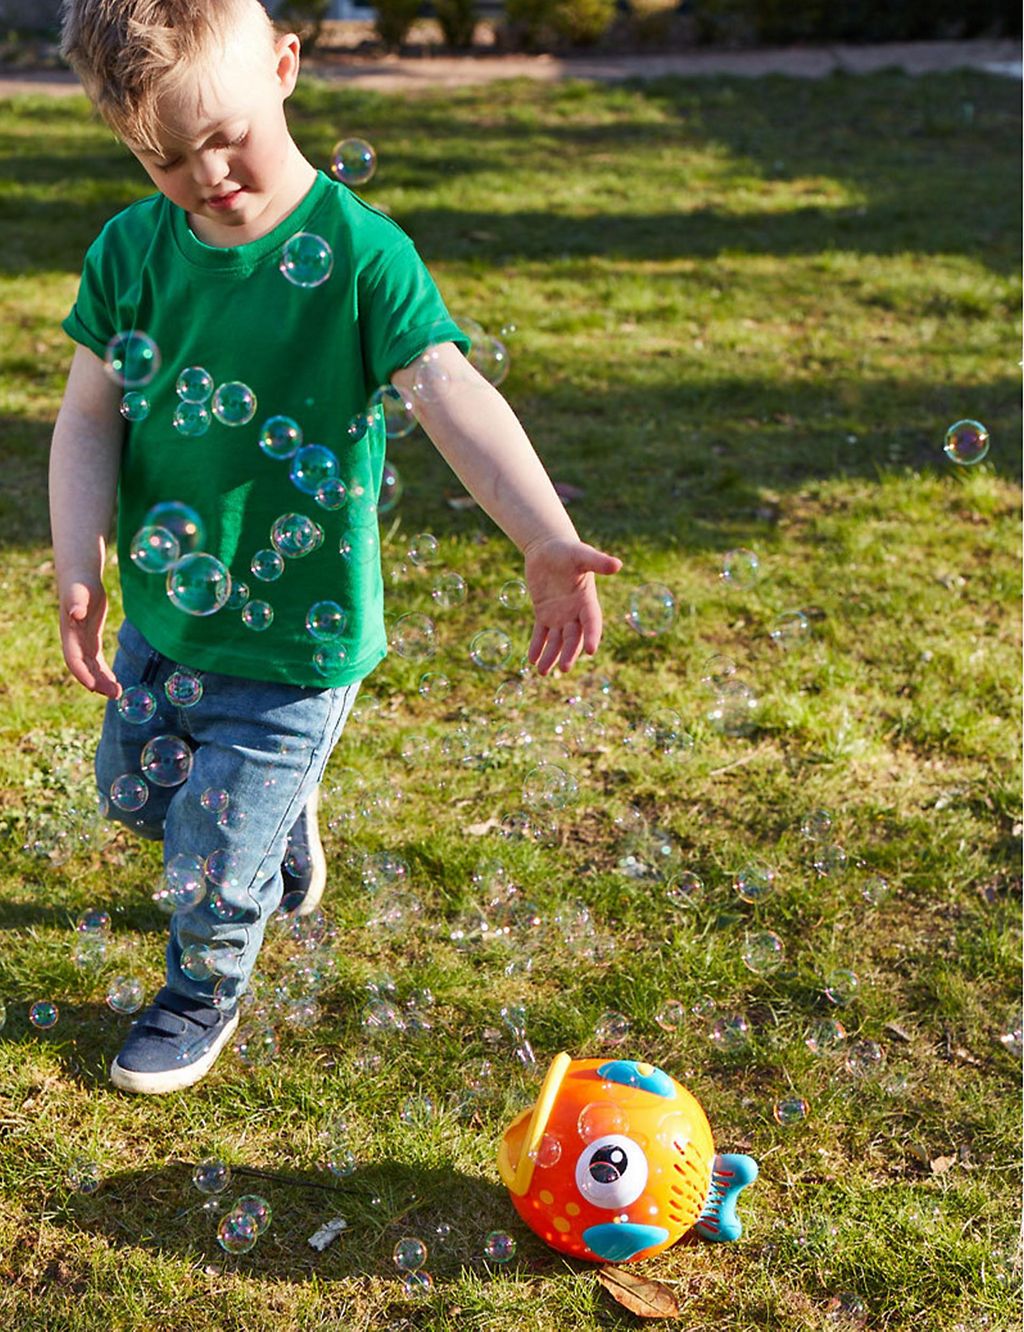 Frankie The Fish Bubble Machine (3+ Yrs) 2 of 3